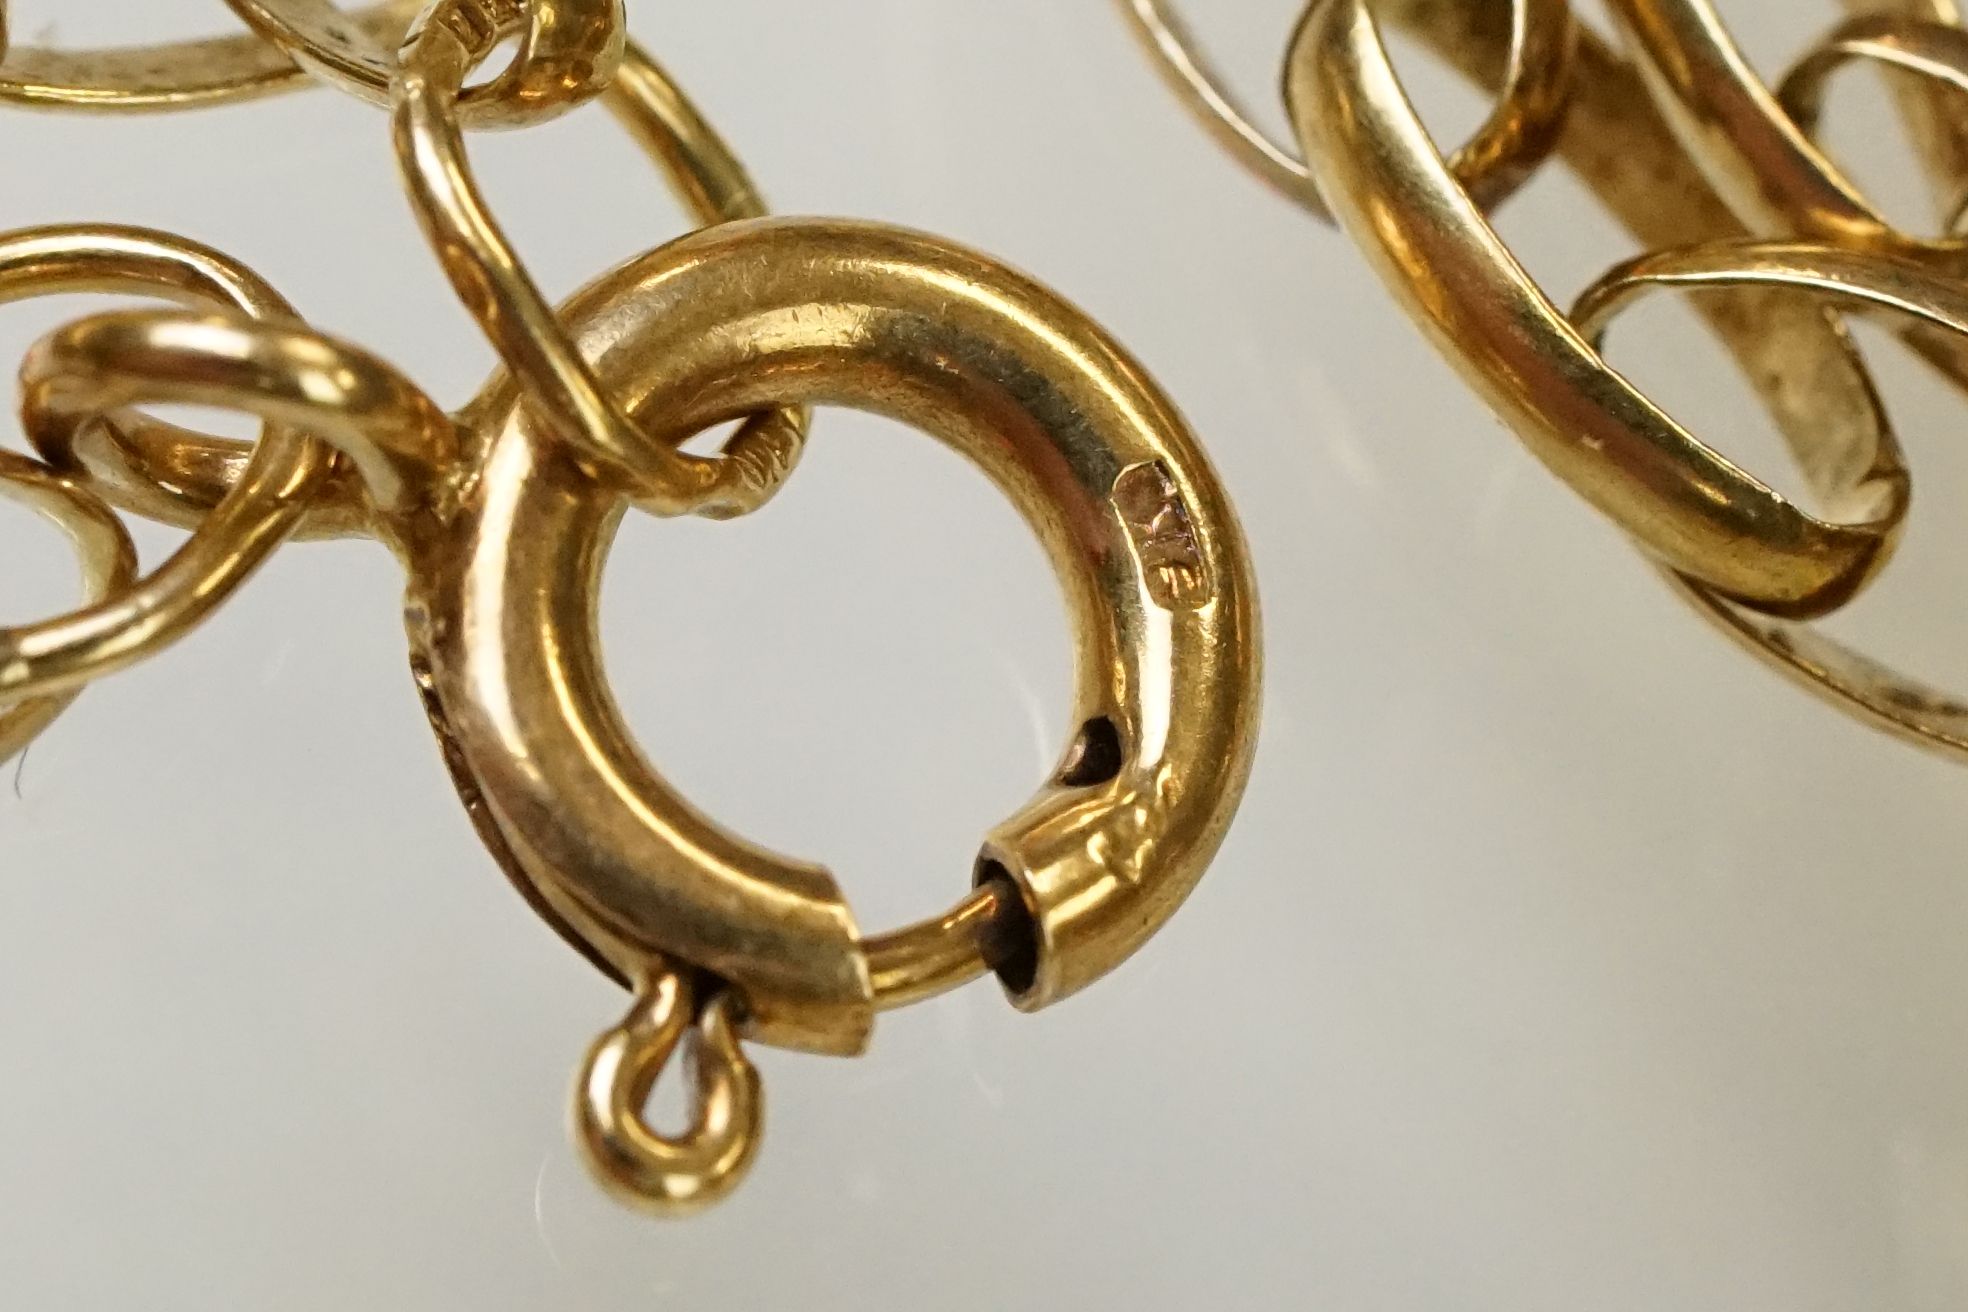 9ct gold oval link necklace chain with spring ring clasp. Marked 9k to clasp. Measures 80cm. - Image 5 of 5